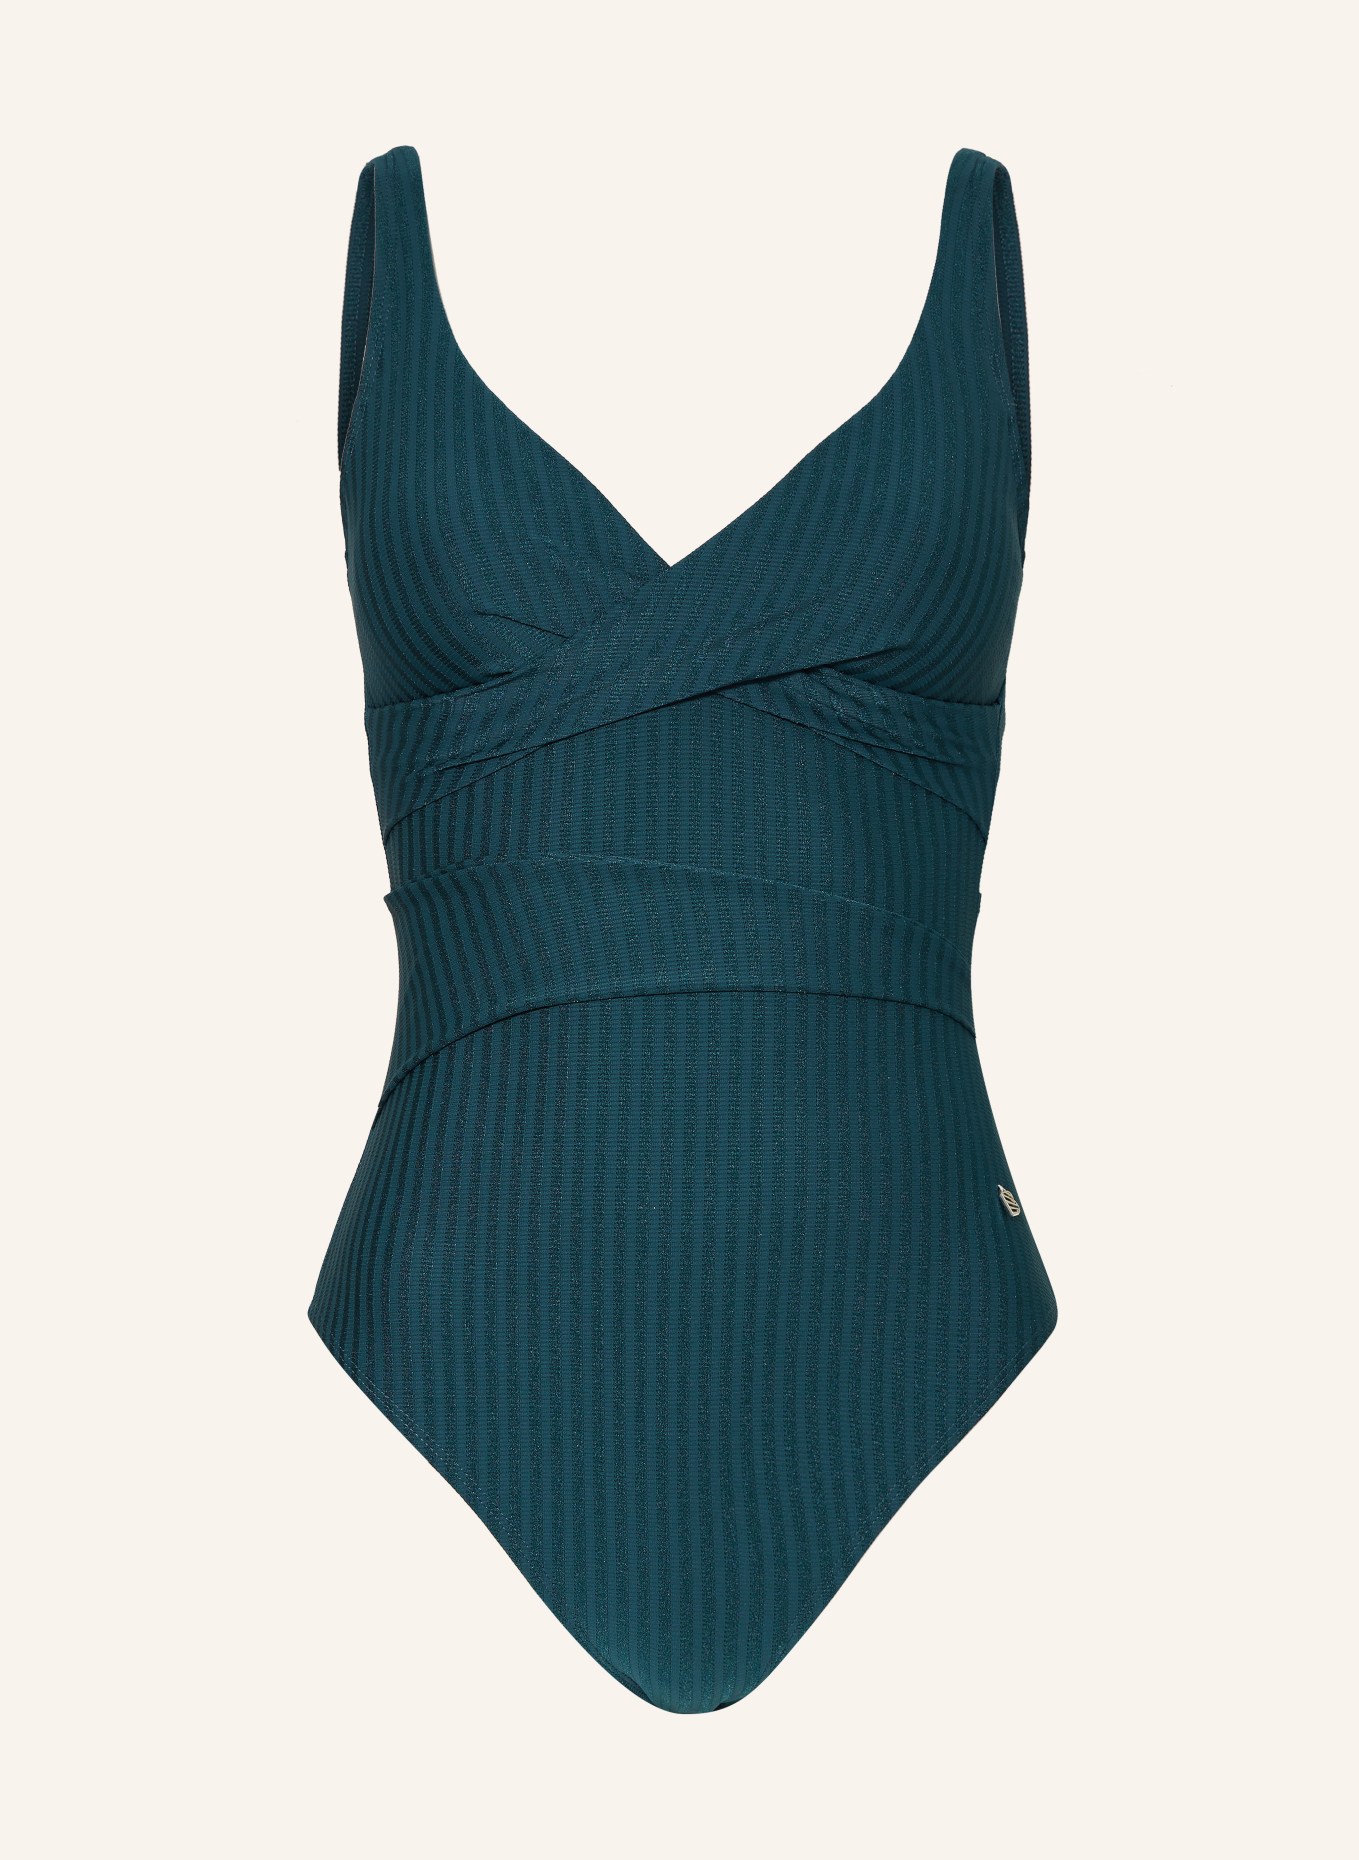 BEACHLIFE Swimsuit REFLECTING POND, Color: TEAL (Image 1)